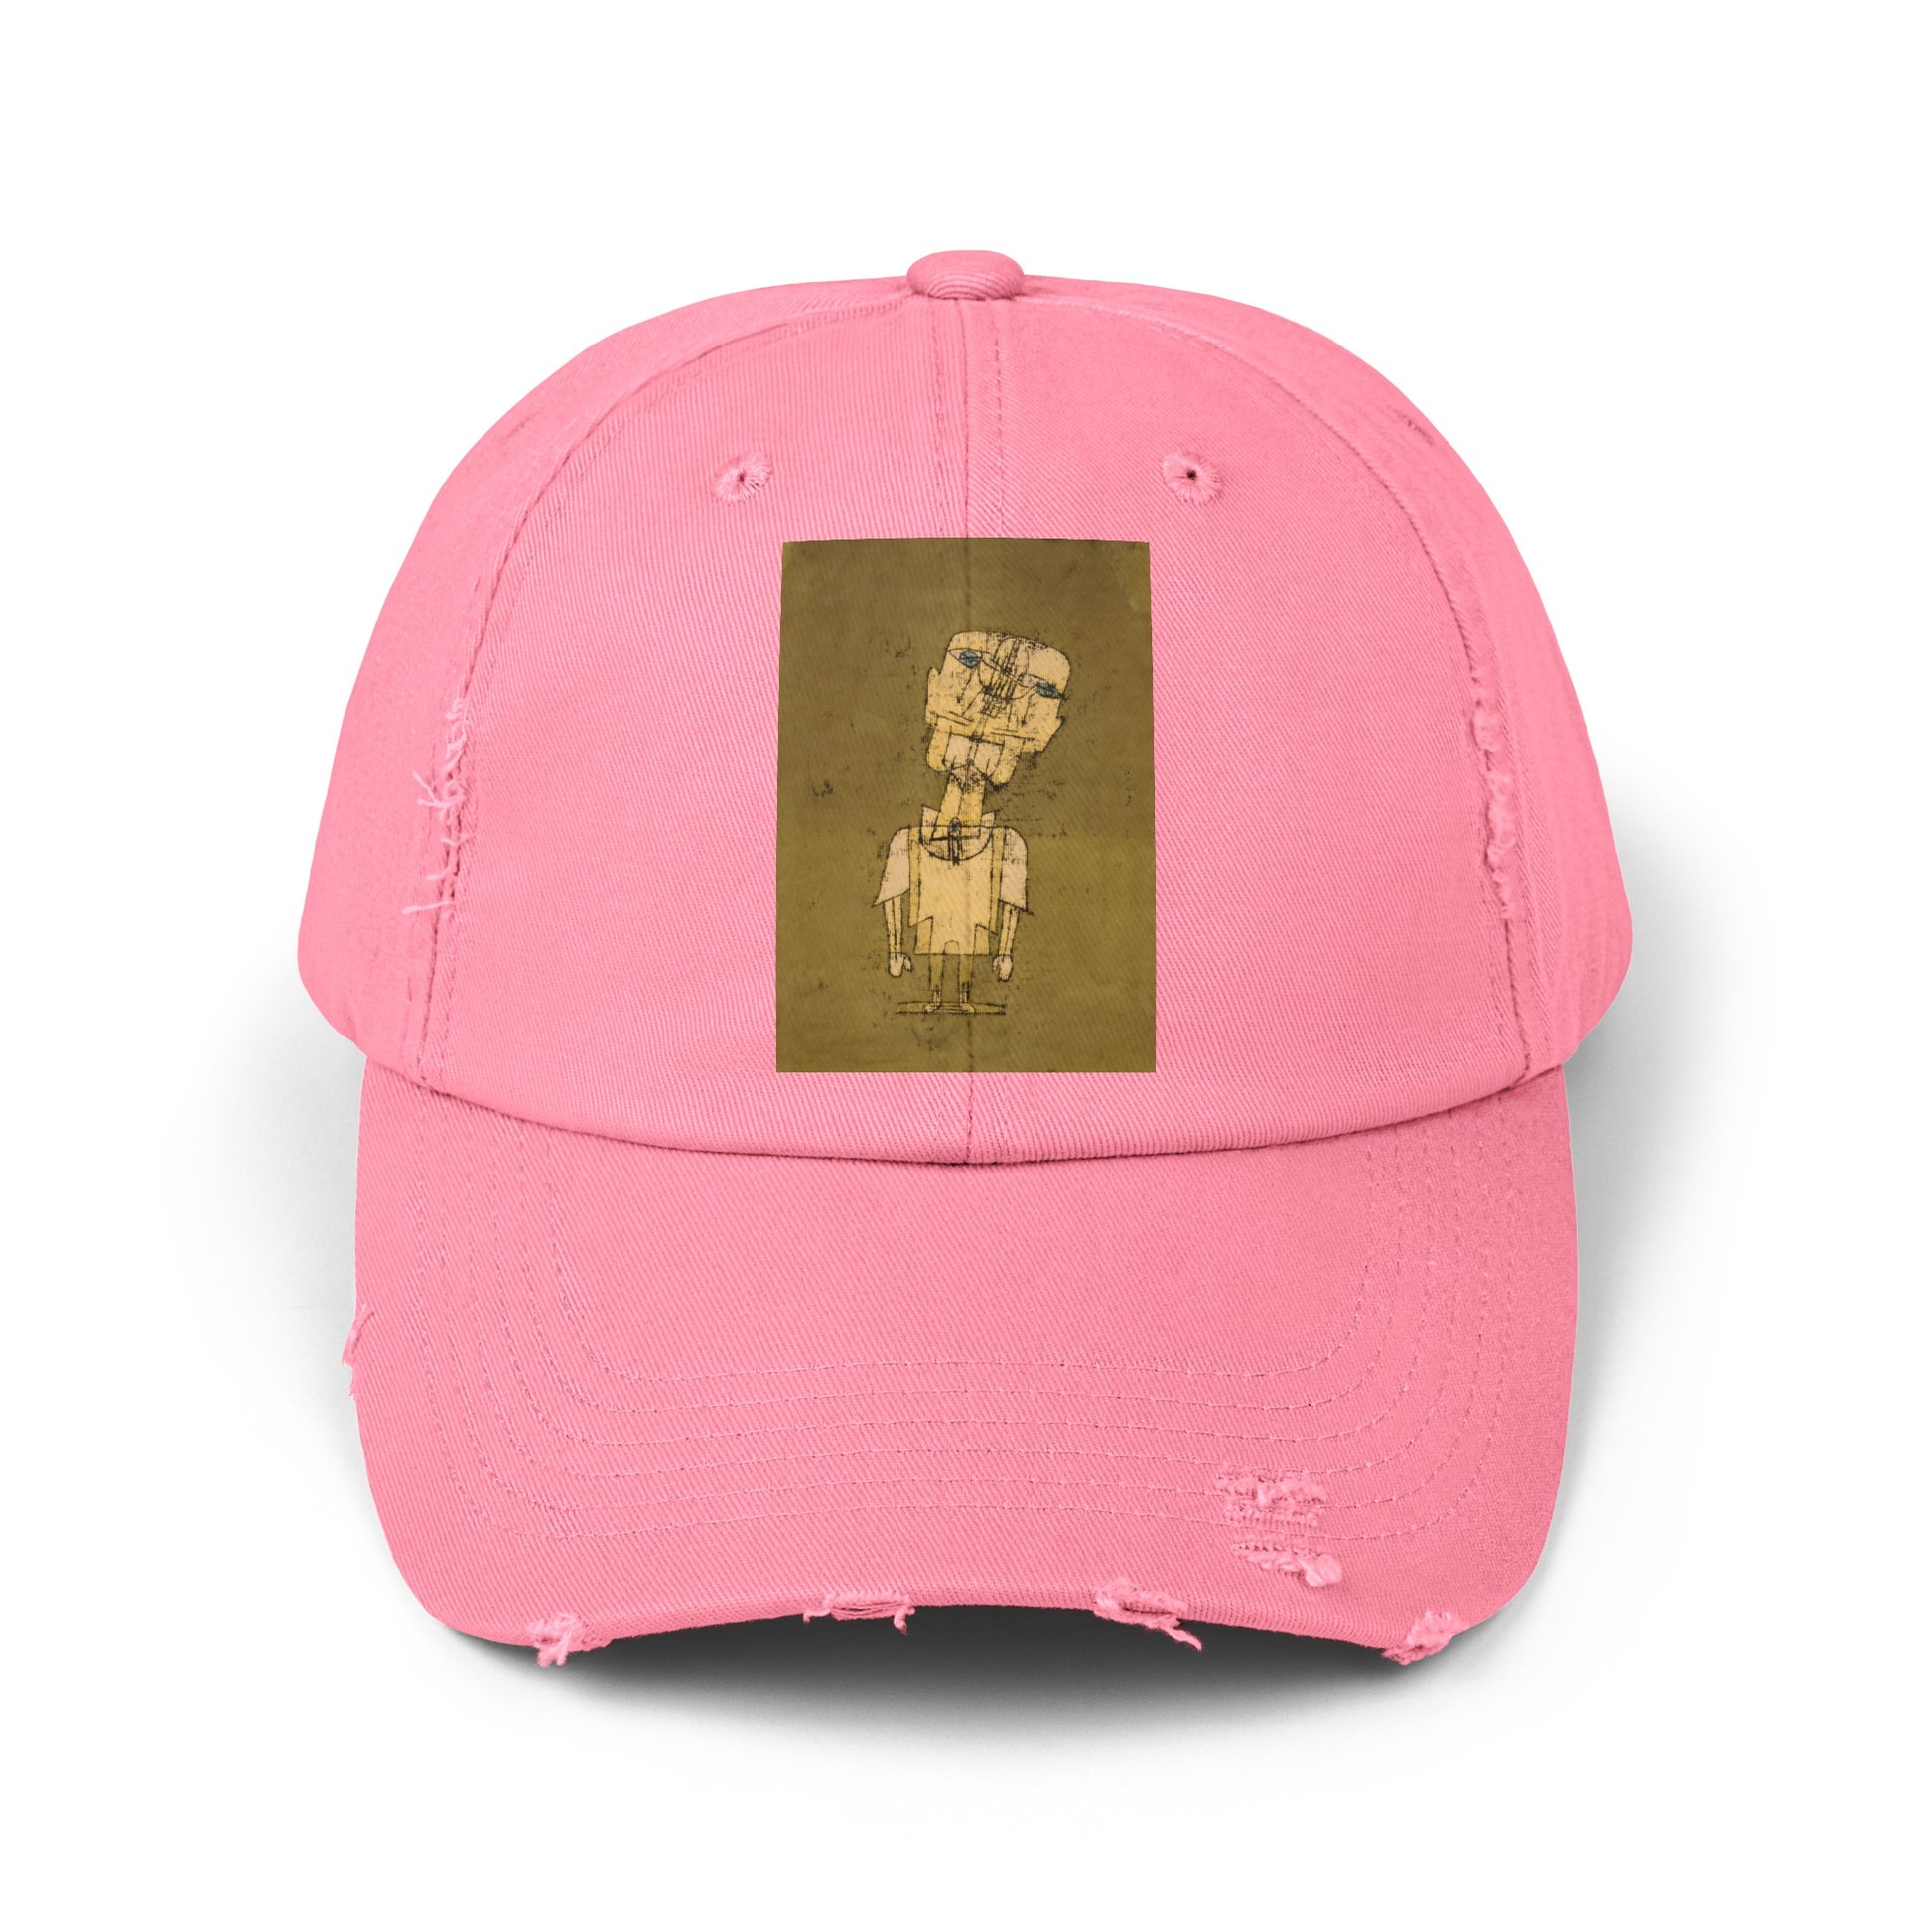 a pink baseball cap with a picture of a man on it